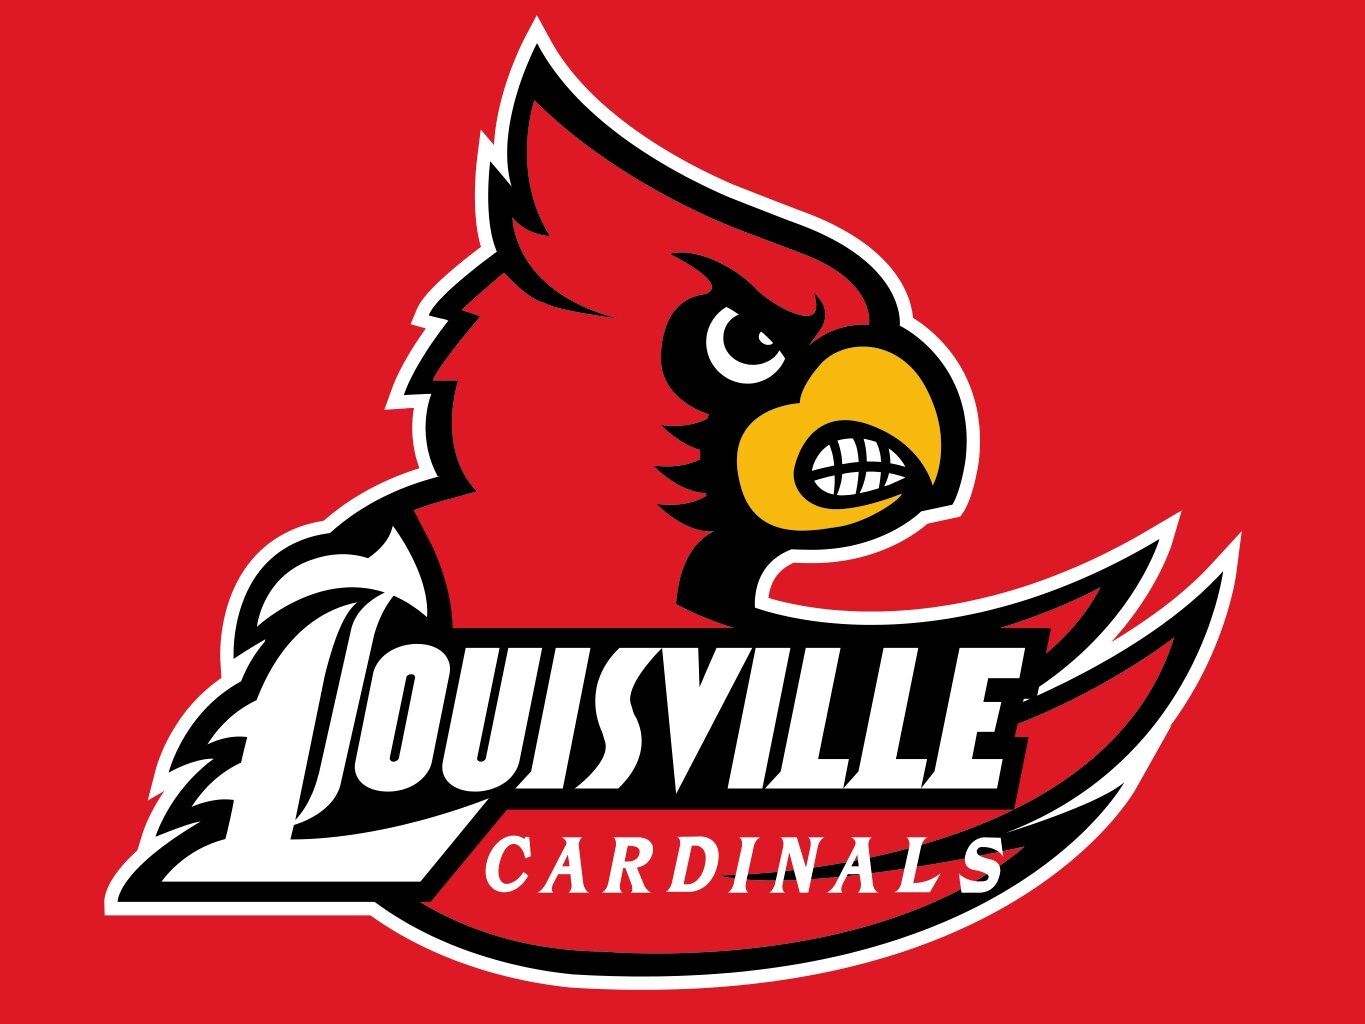 Louisville's vacated 2013 national championship had ties to Indy